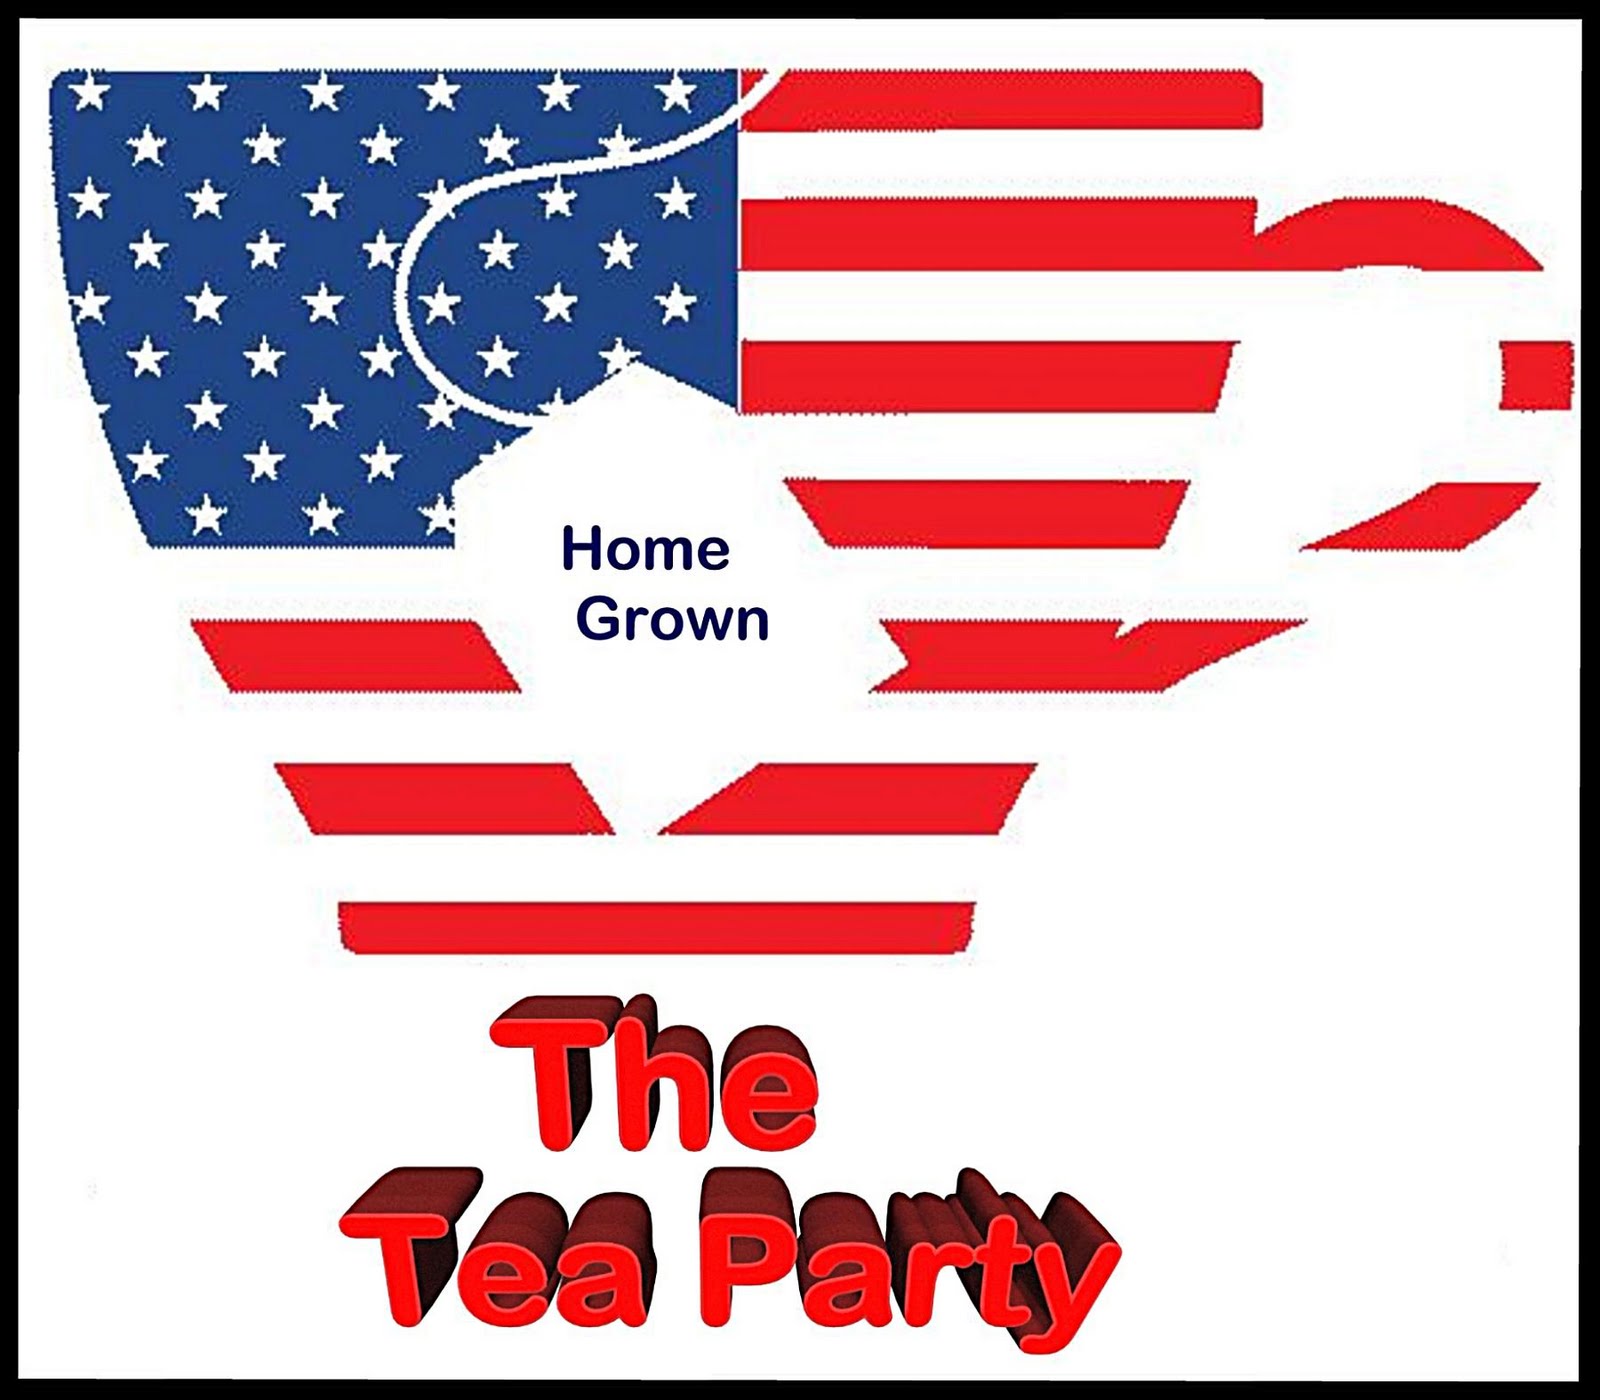 The American Tea Party Tea Party Senators Win First Round … Or Did They